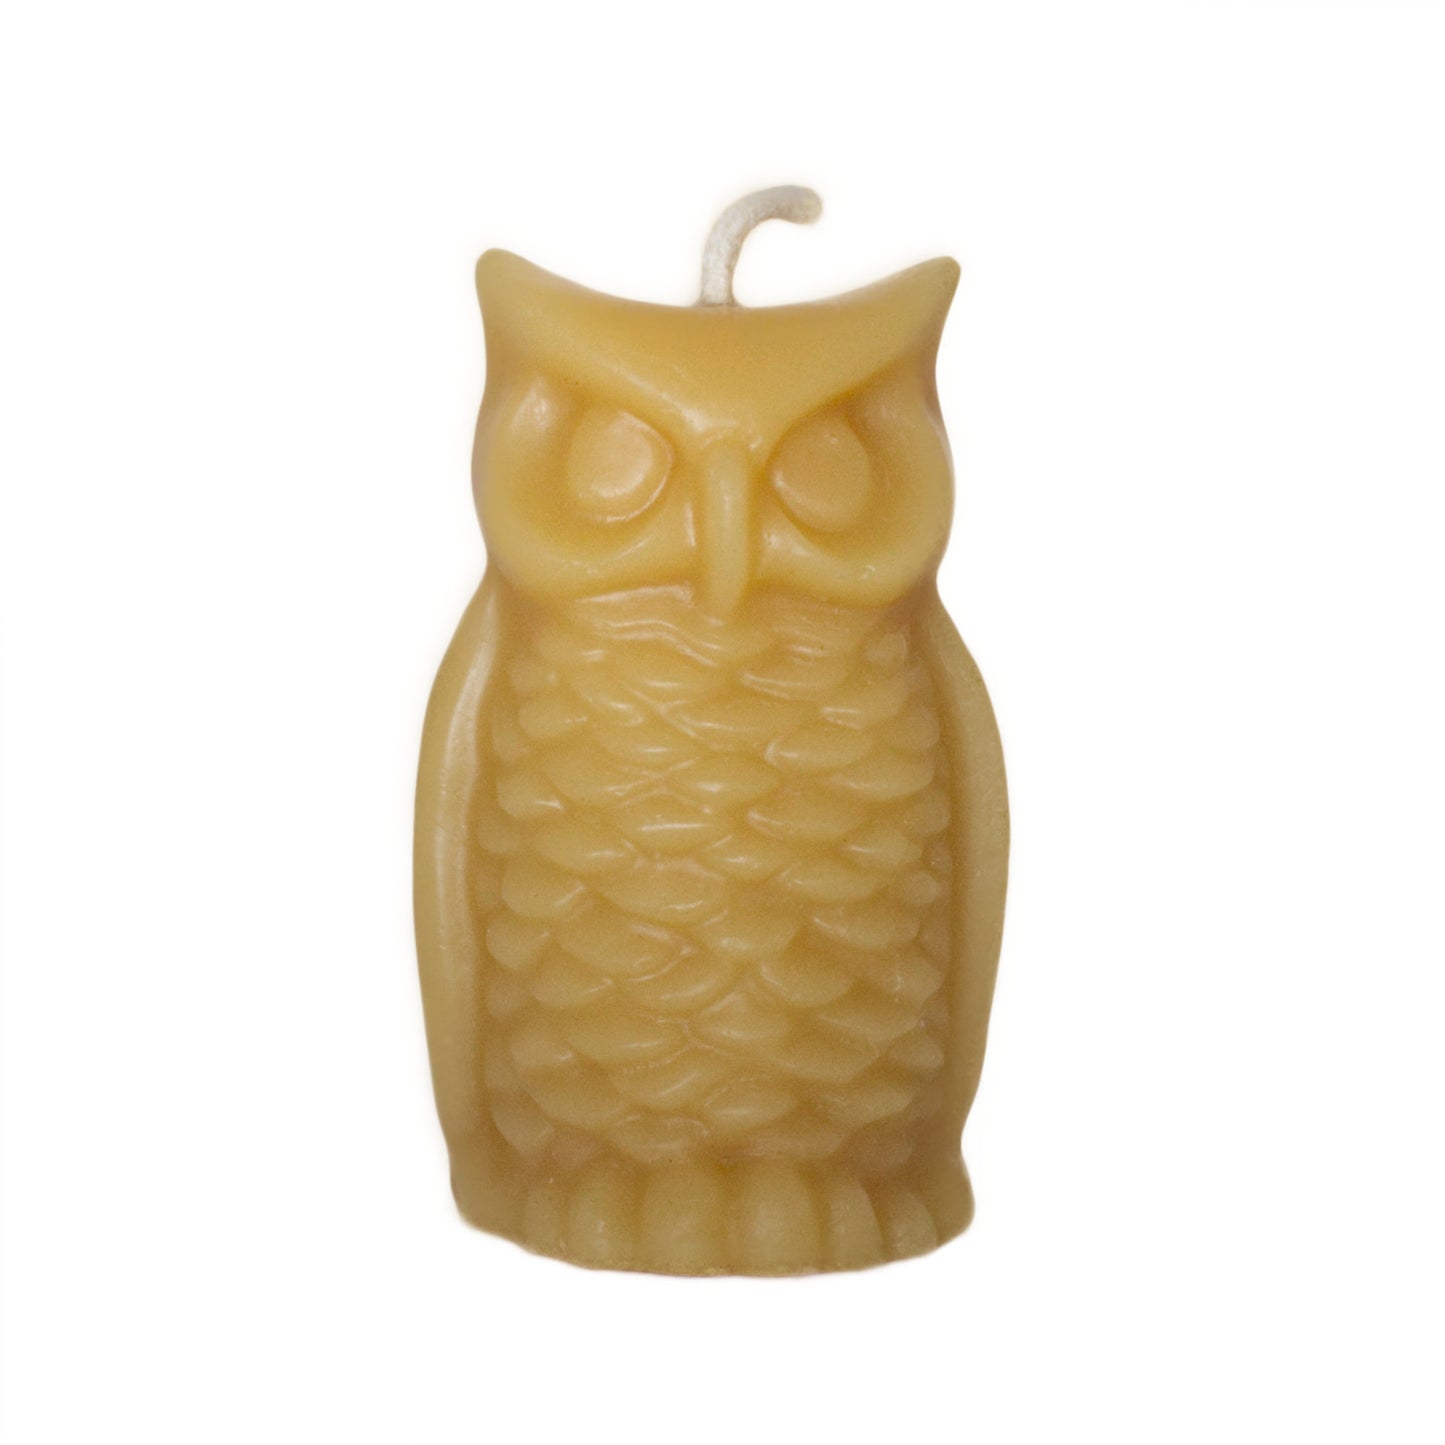 Beeswax candle owl ornamental